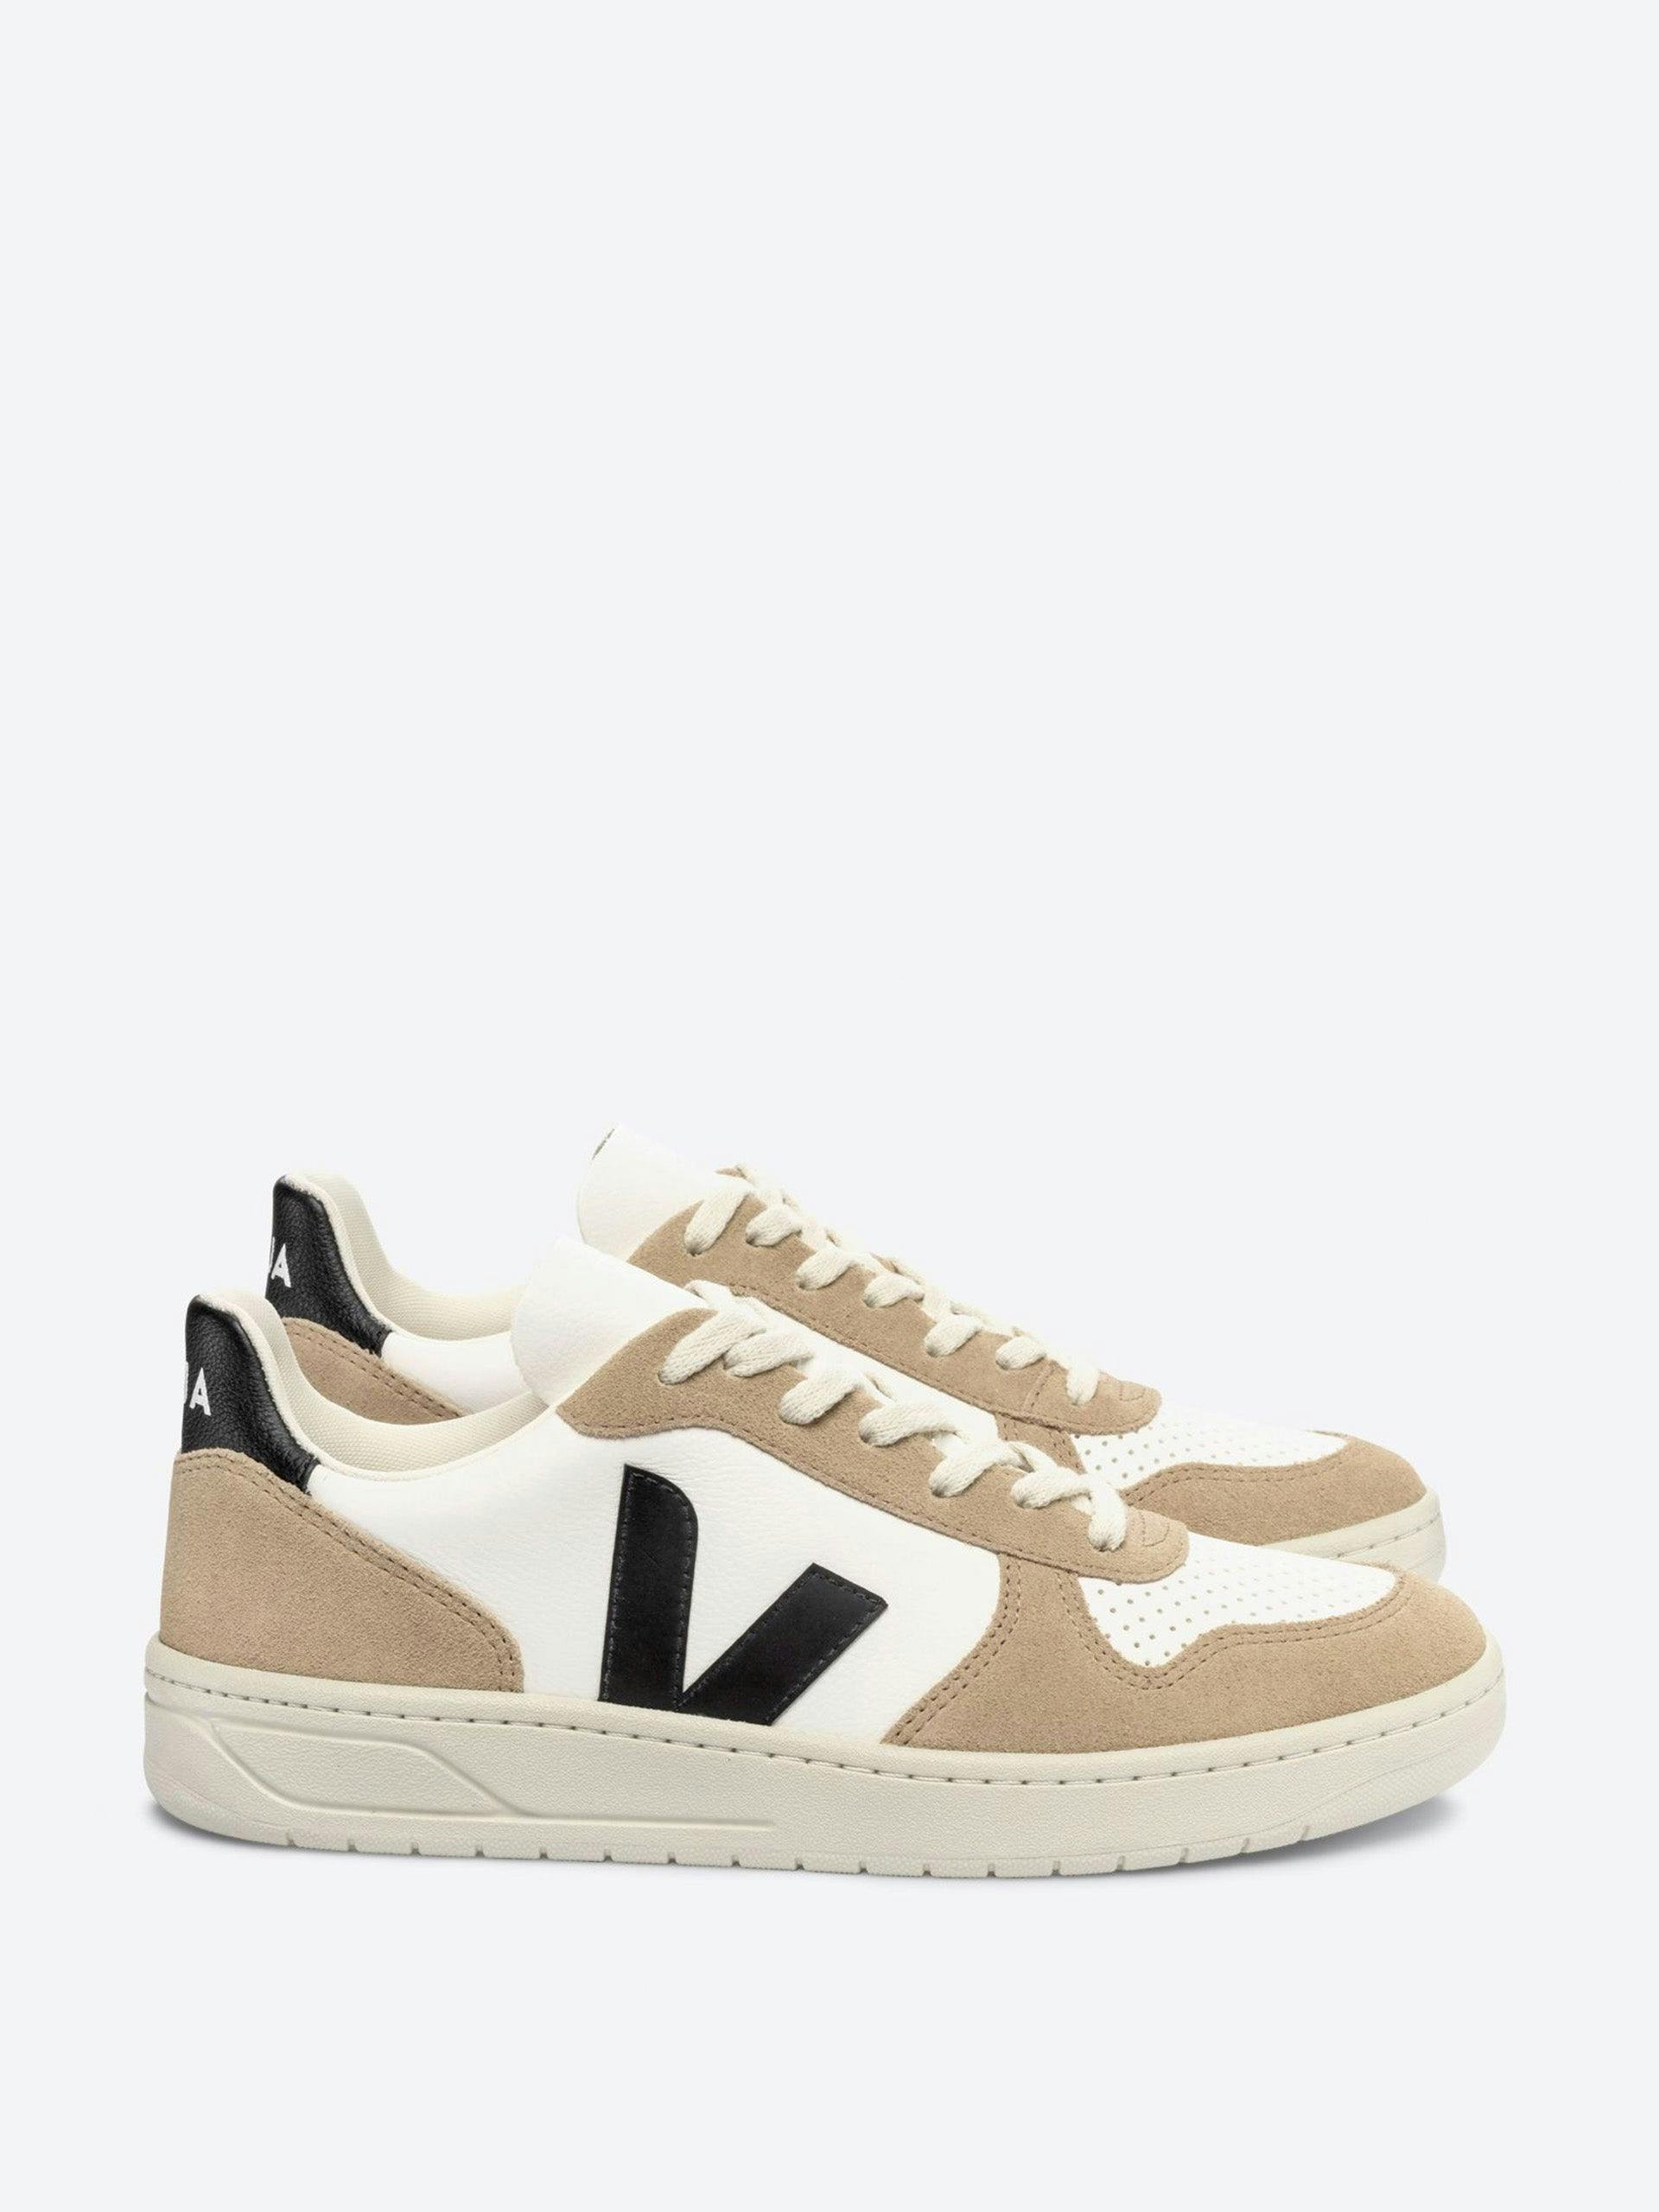 V-10 beige and white trainers